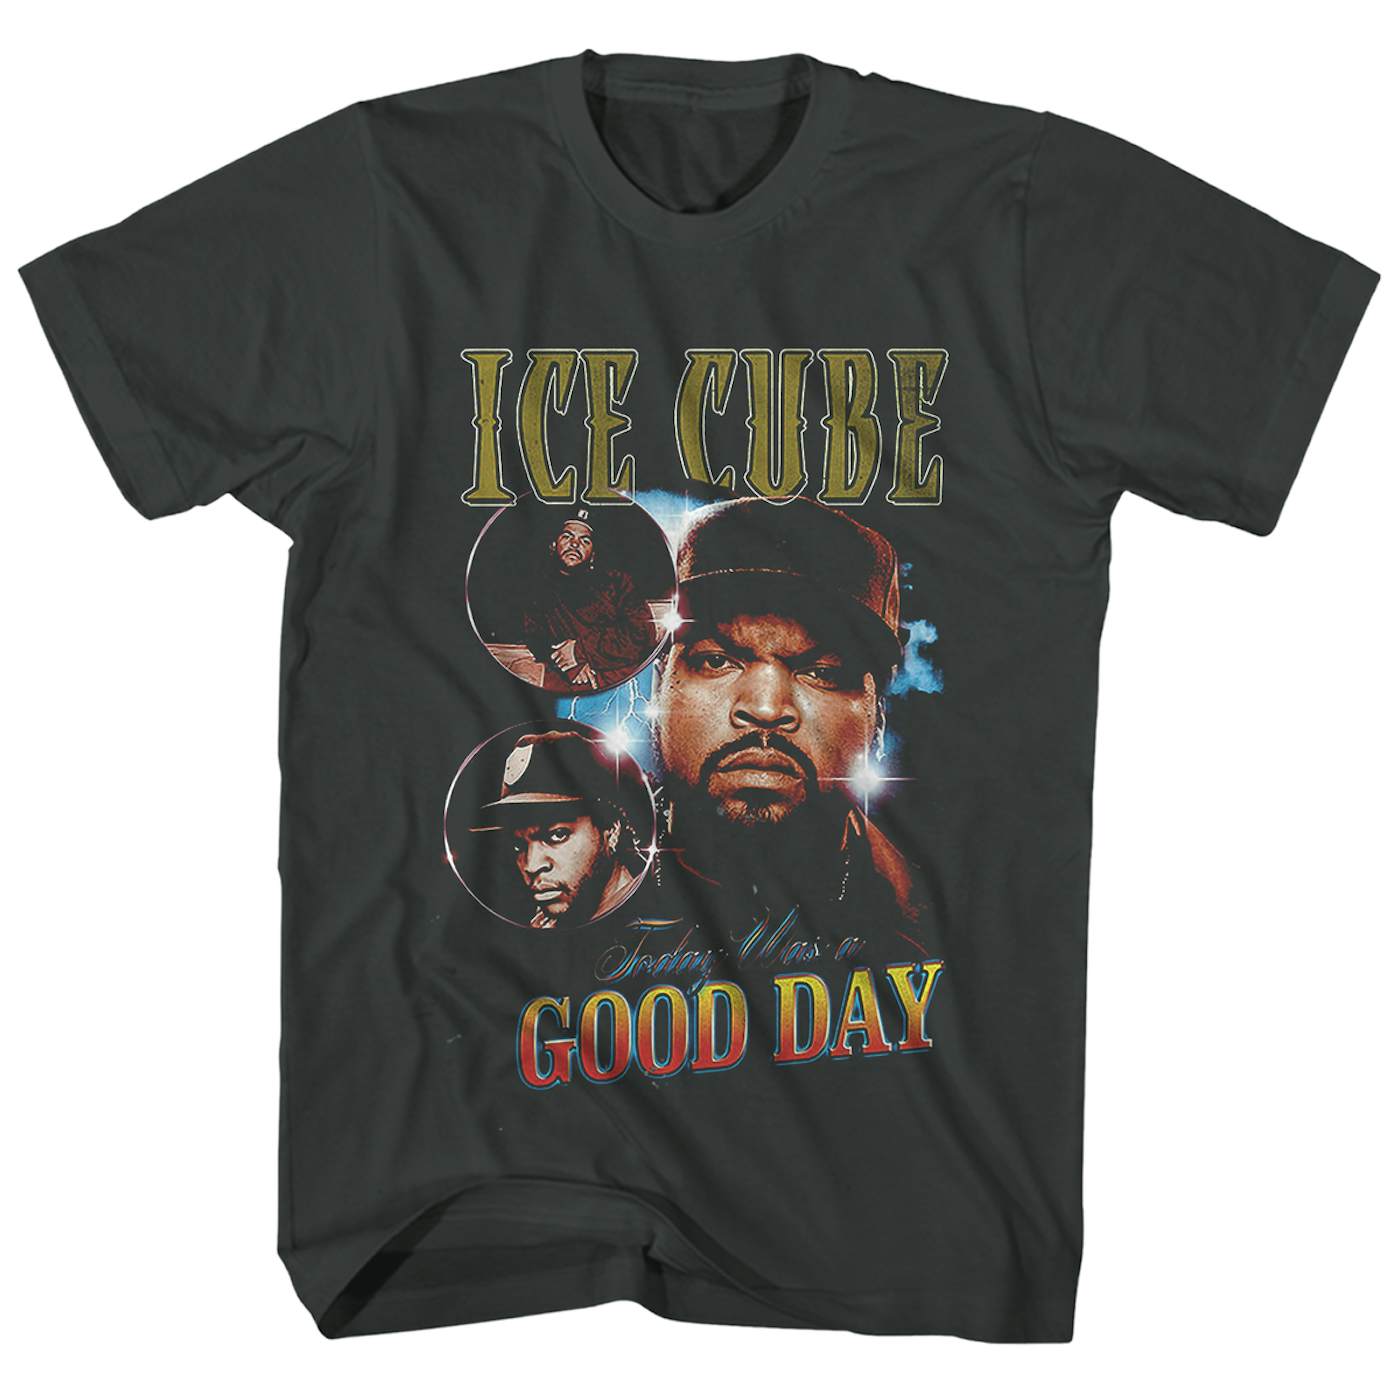 Åh gud Blå salut Ice Cube T-Shirt | Today Was A Good Day Photo Collage Ice Cube Shirt